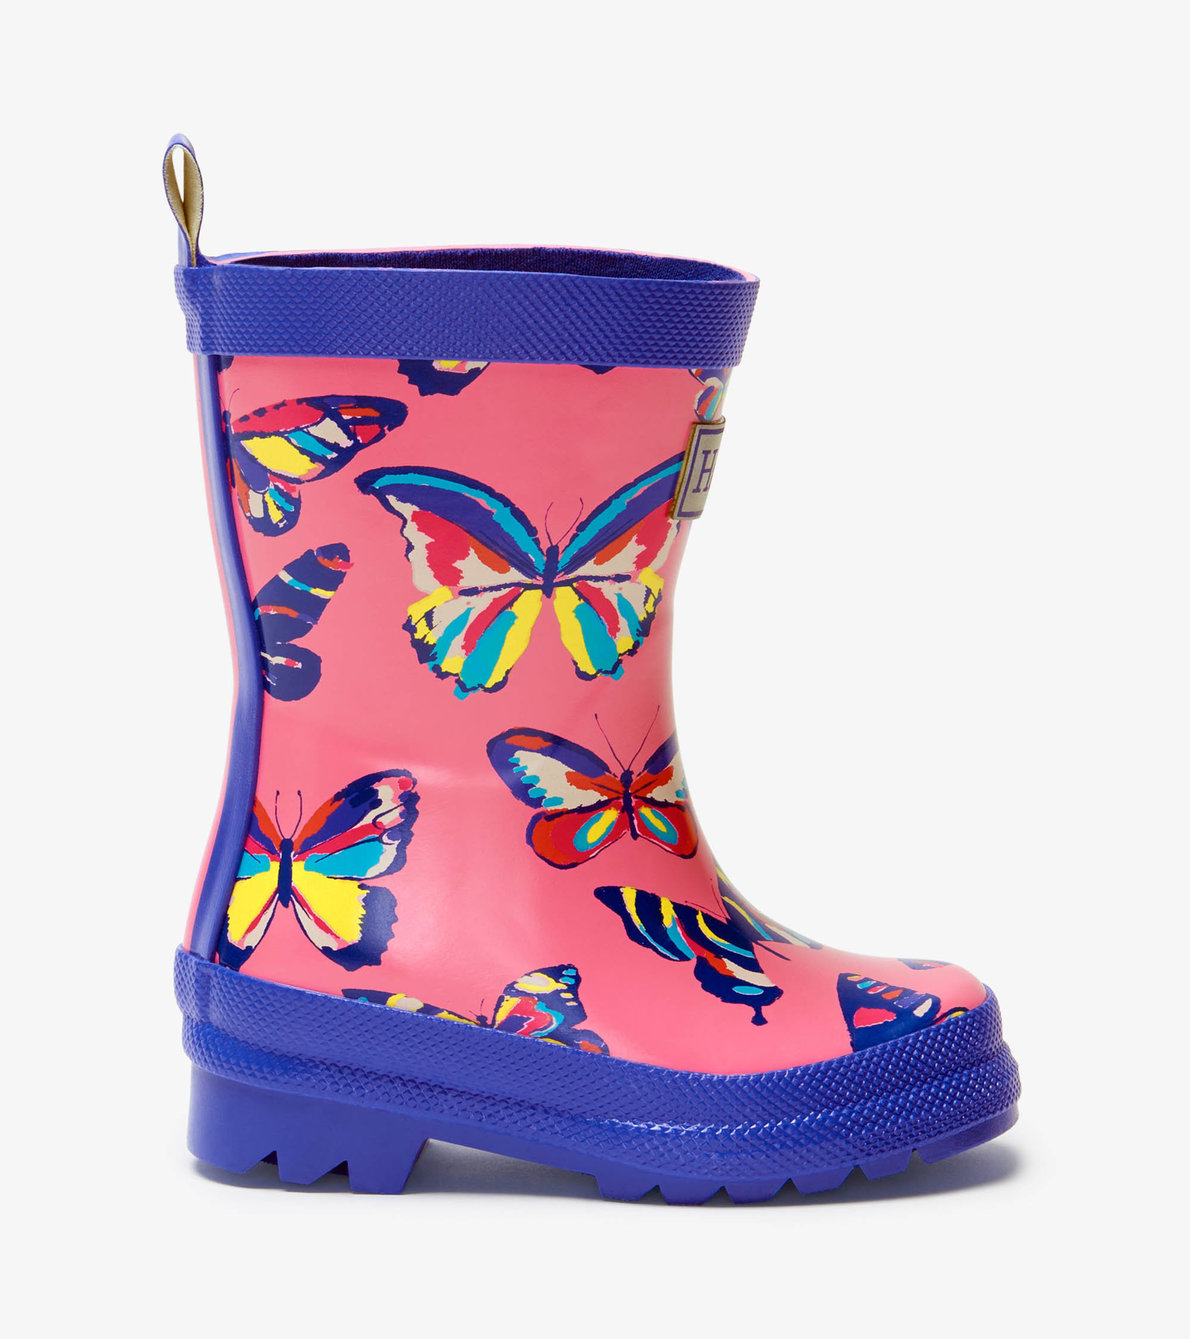 View larger image of My 1st Rain Boots - Vibrant Butterflies